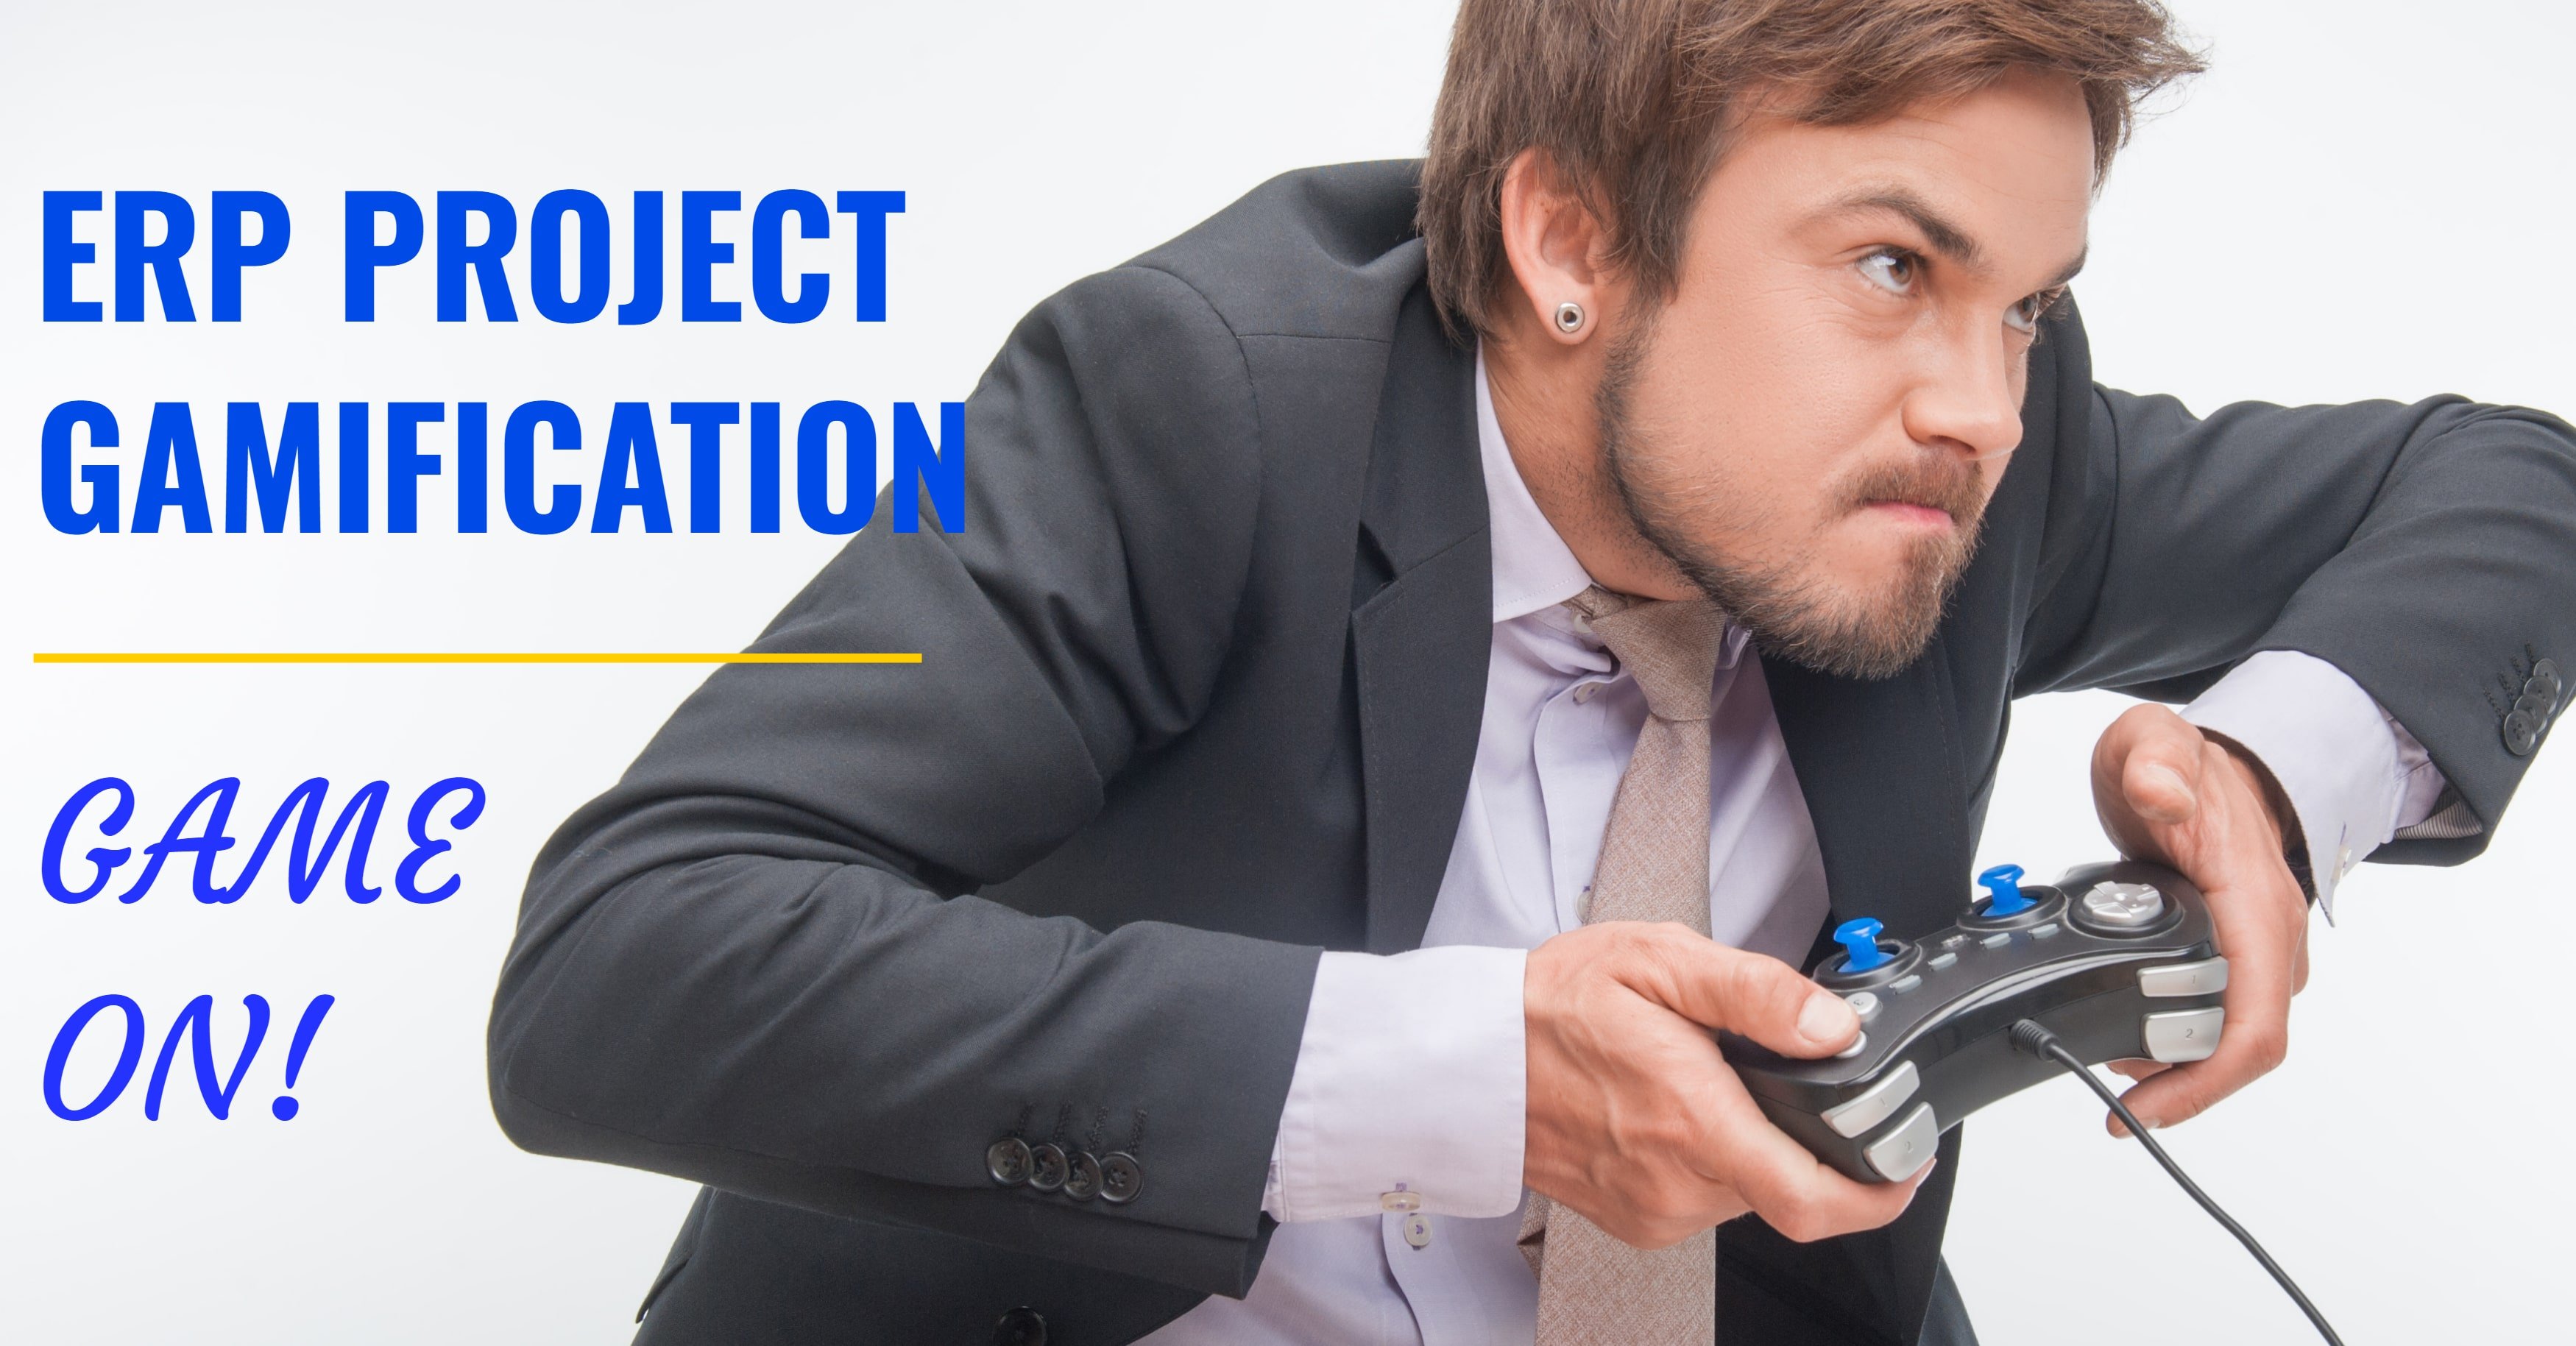 ERP Project Gamification: Game On!